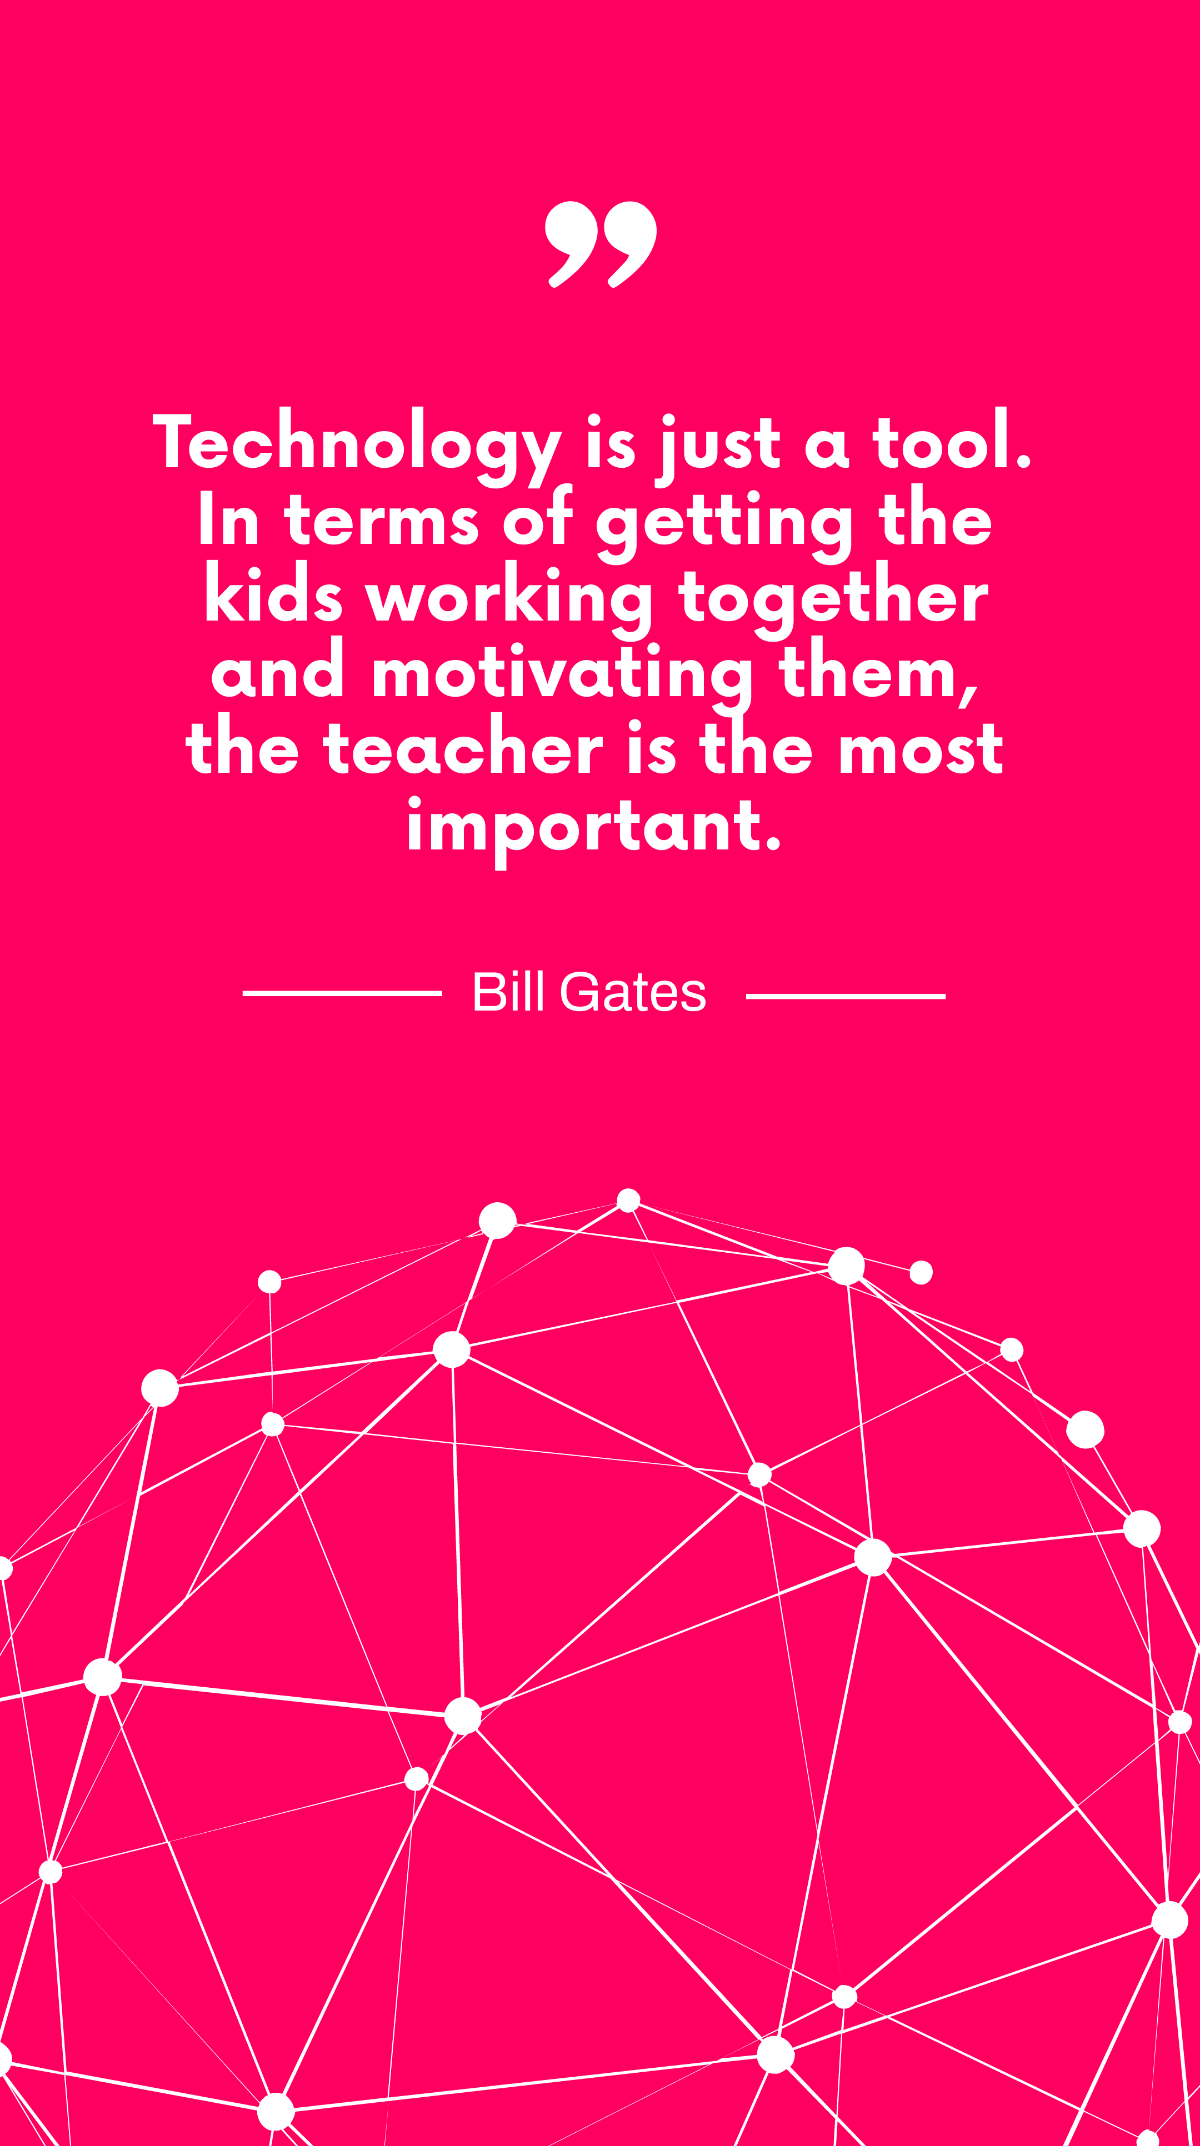 Free Bill Gates - Technology is just a tool. In terms of getting the kids working together and motivating them, the teacher is the most important. Template